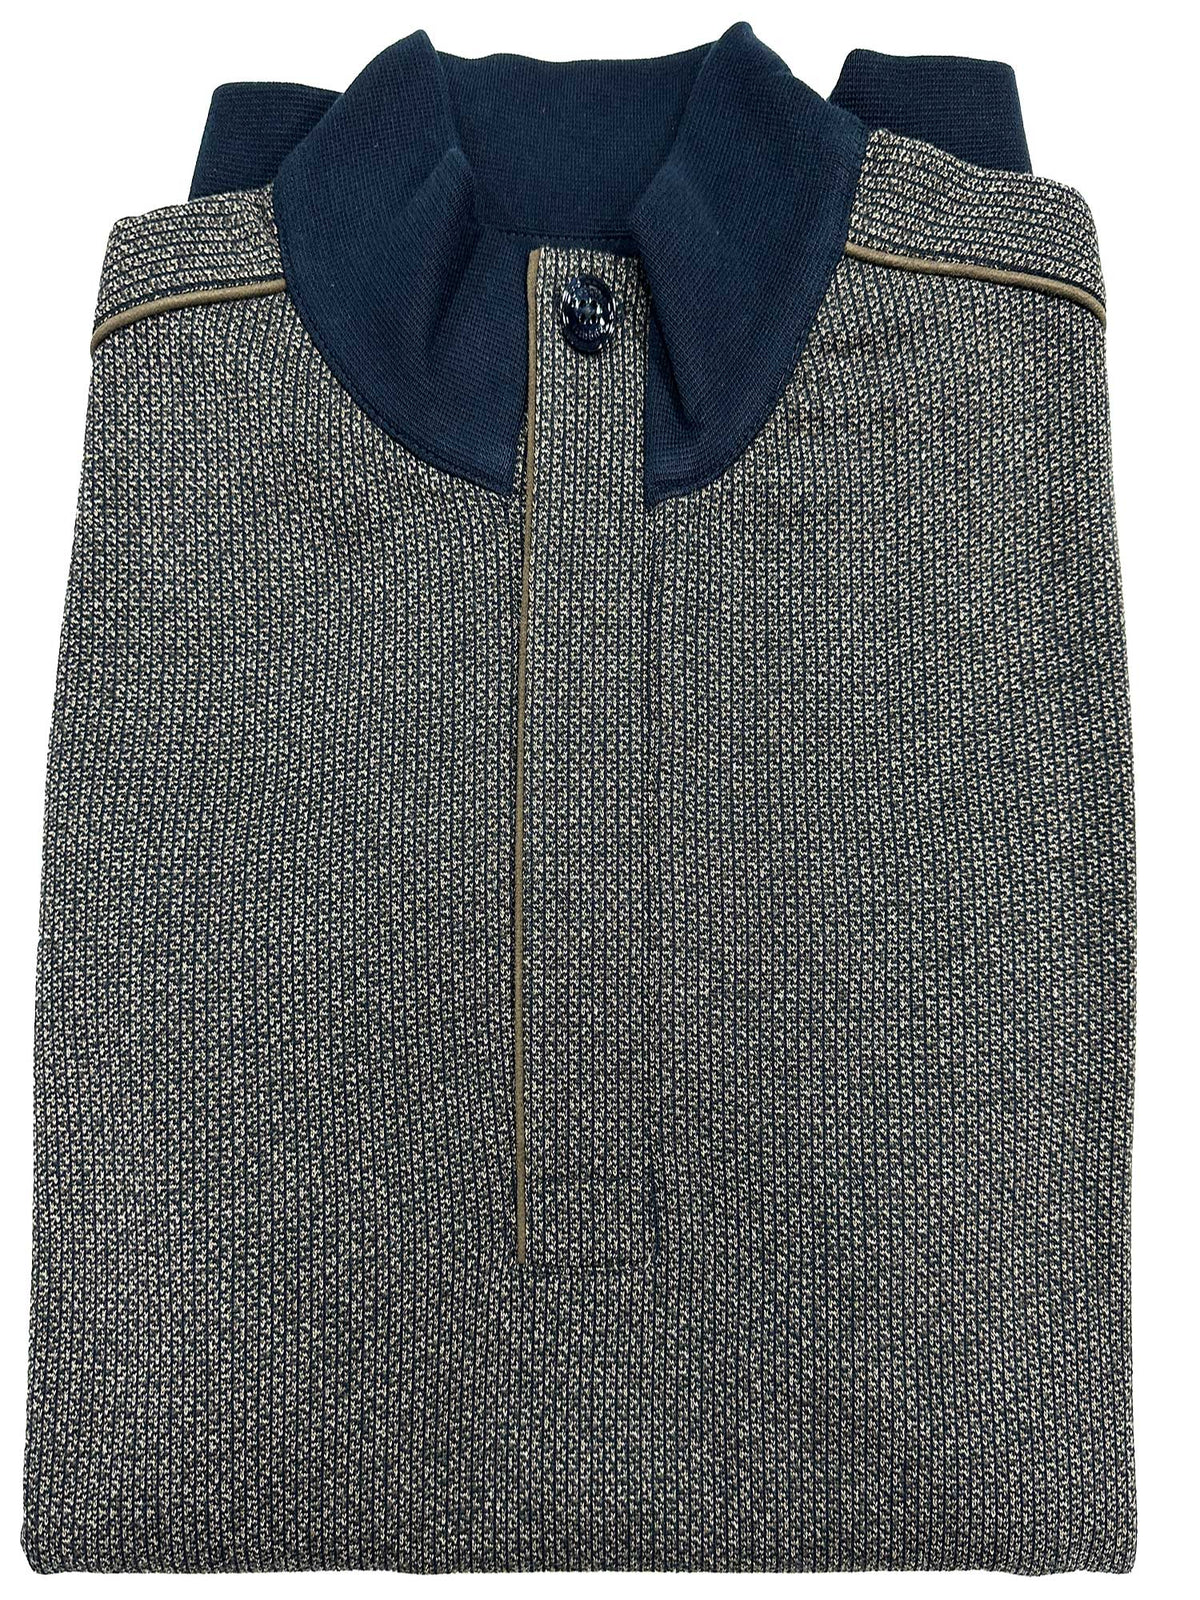 45062-970  https://harrysformenswear.com.au/products/45062-970  Premium knitwear with leather trim details. Made in Turkey by bugatti - check out their new autumn and winter collection. Individual styling that breaks away from uniformity. THE BUGATTI LOOK - CULTIVATED, CASUAL AND CHIC. Indulge in the best of both worlds. This luxurious piece features supple leather accents and impe…